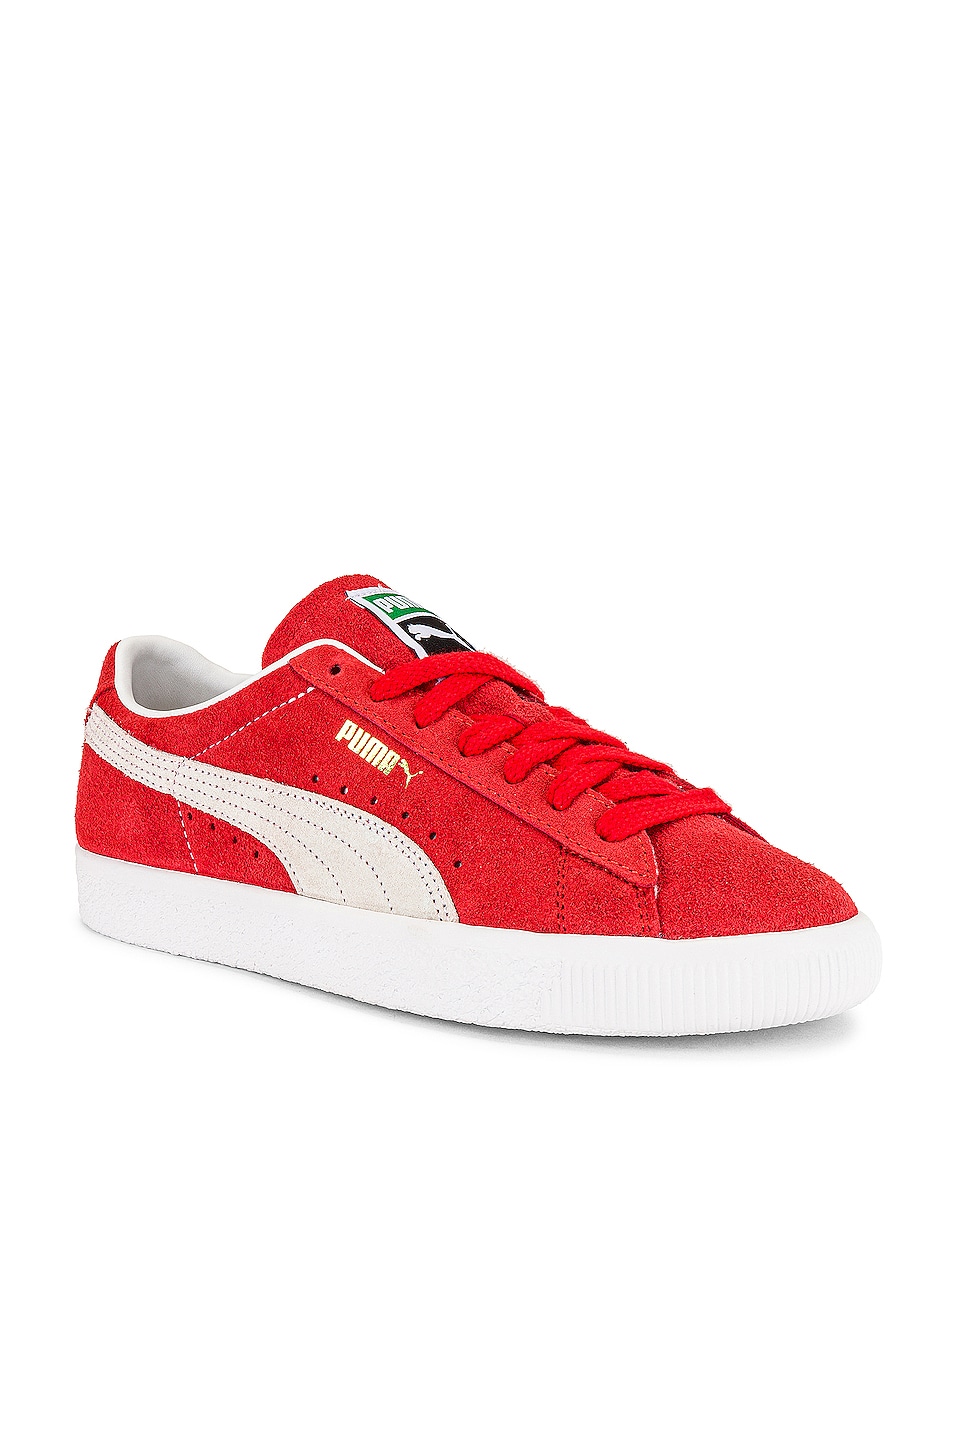 Puma Select Suede in Red | REVOLVE